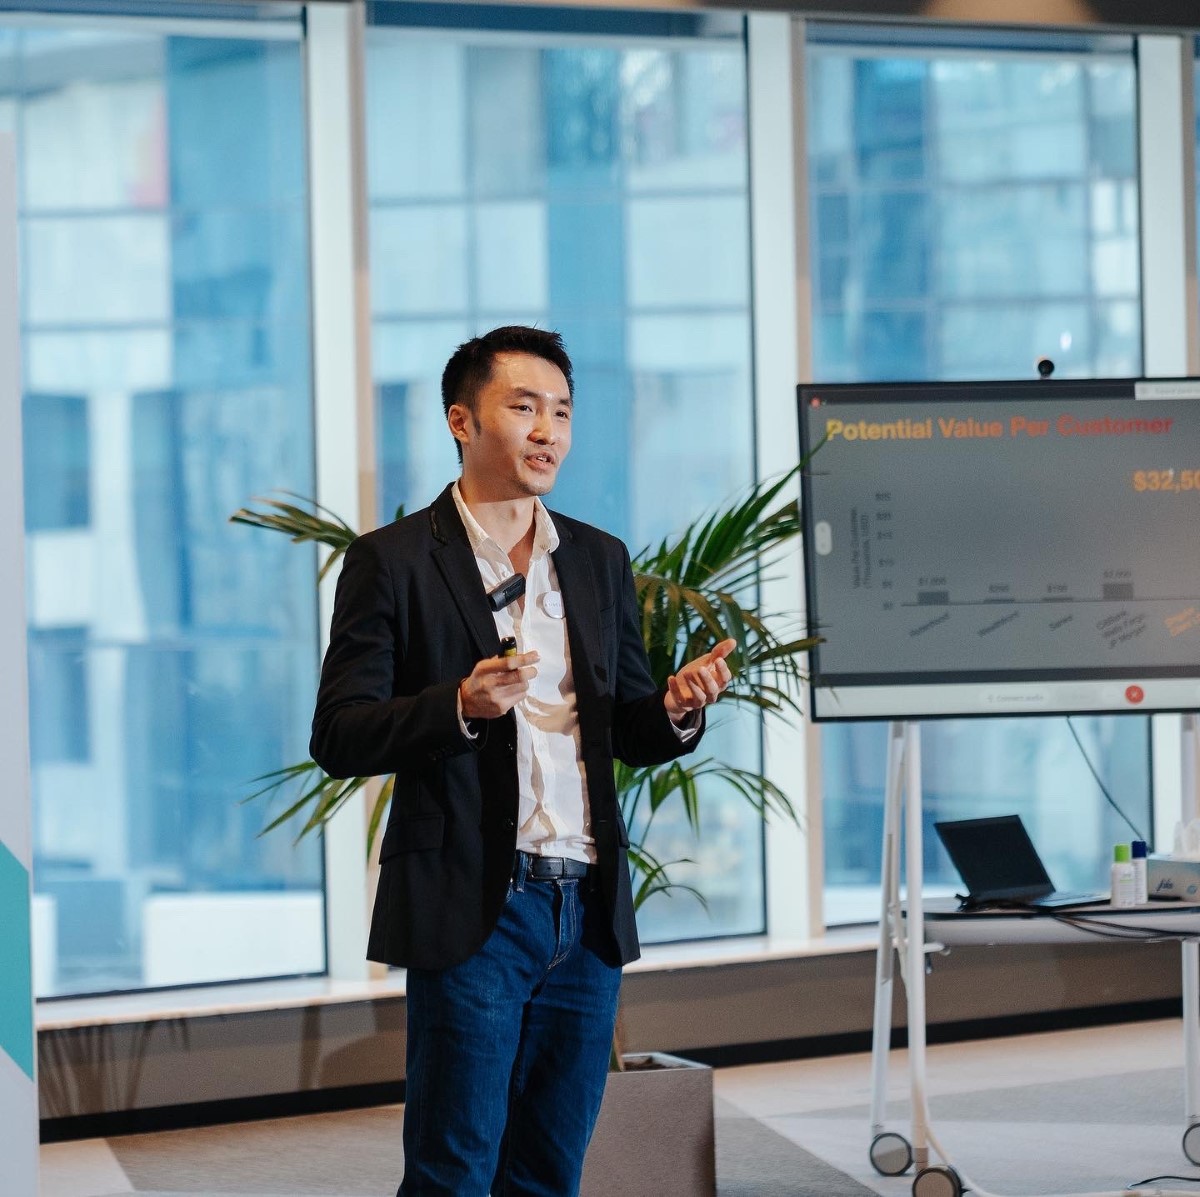 A medium full shot of Singular co-founder and CEO Terrence Hooi mid-presentation in front of a set of ceiling-to-floor windows.